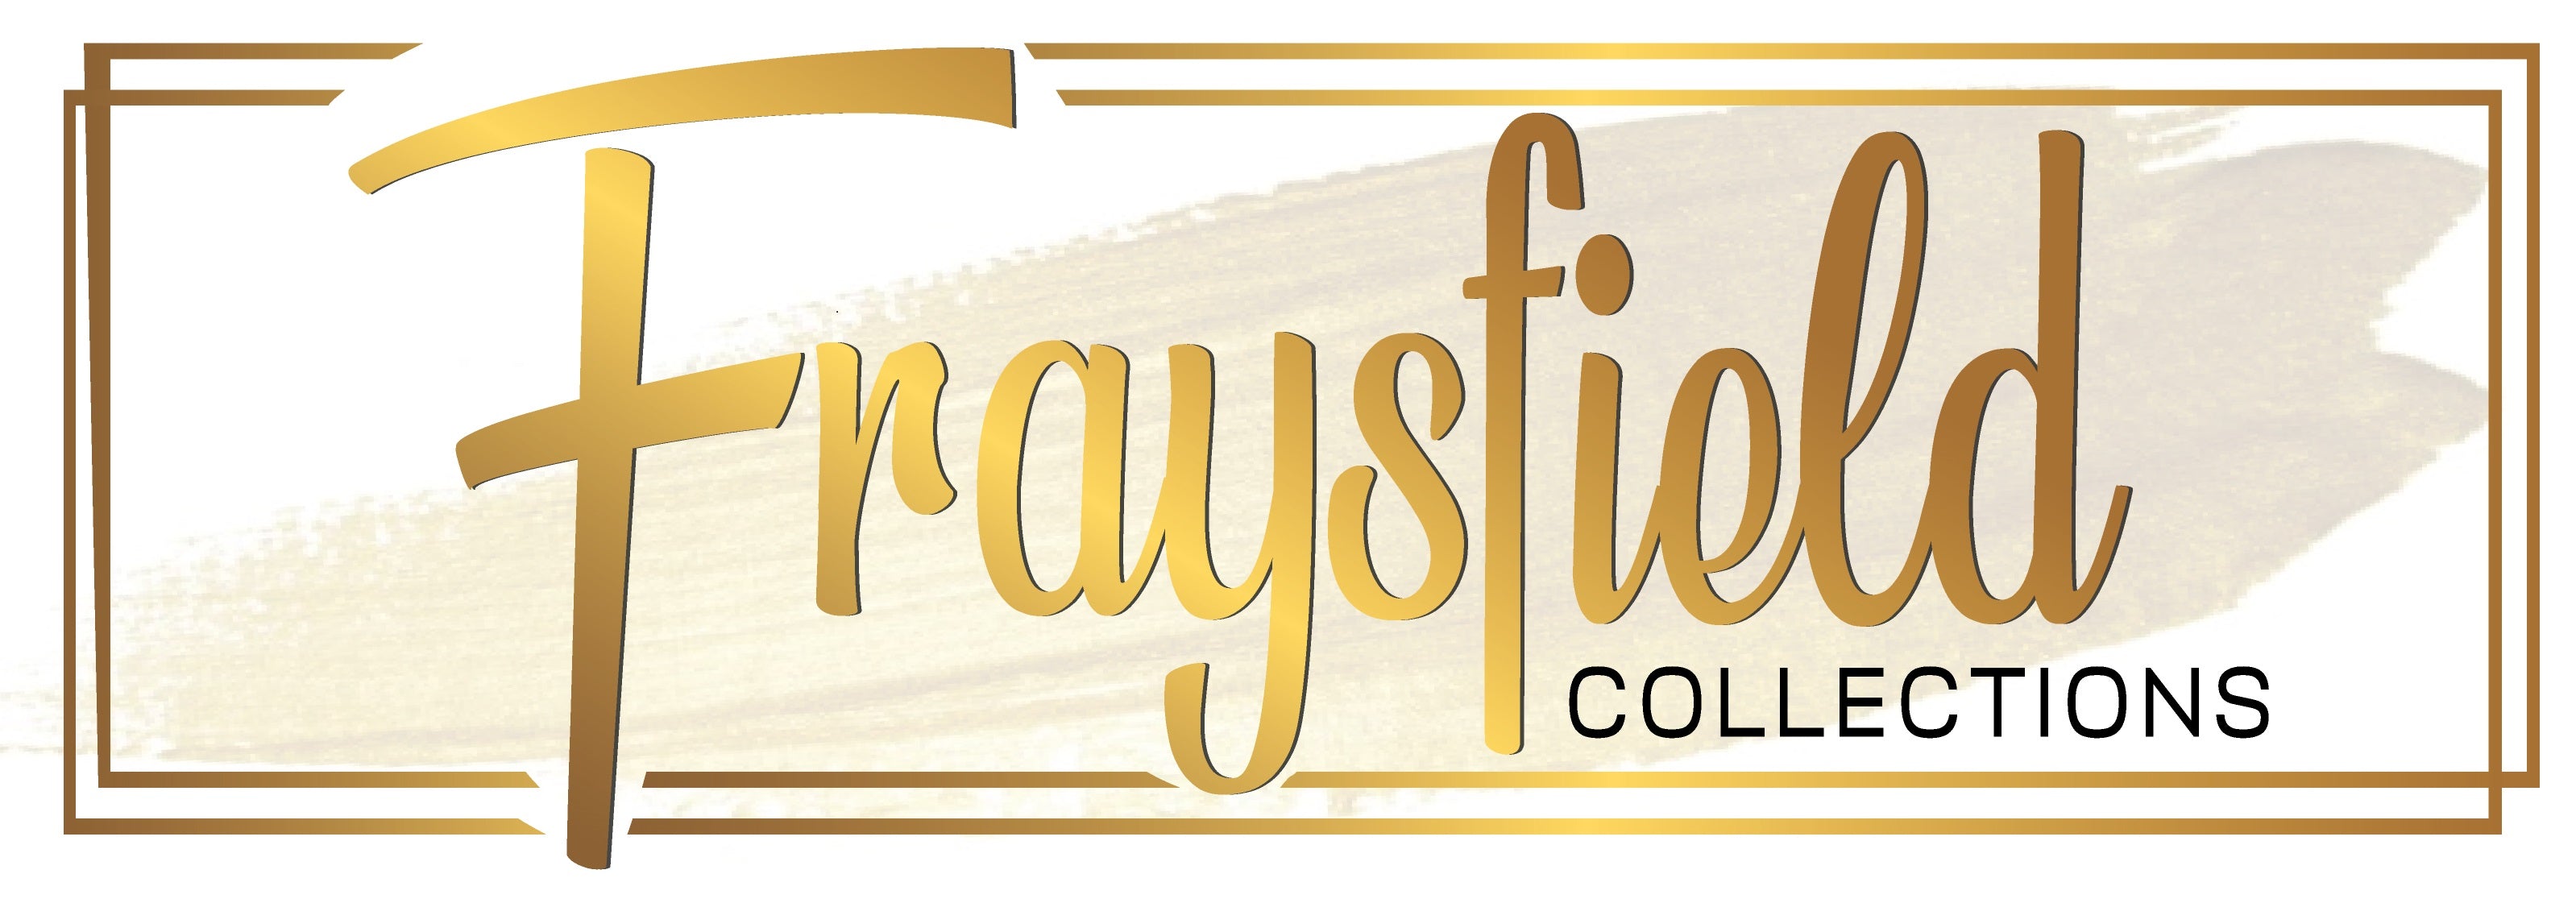 Fraysfield Collections 